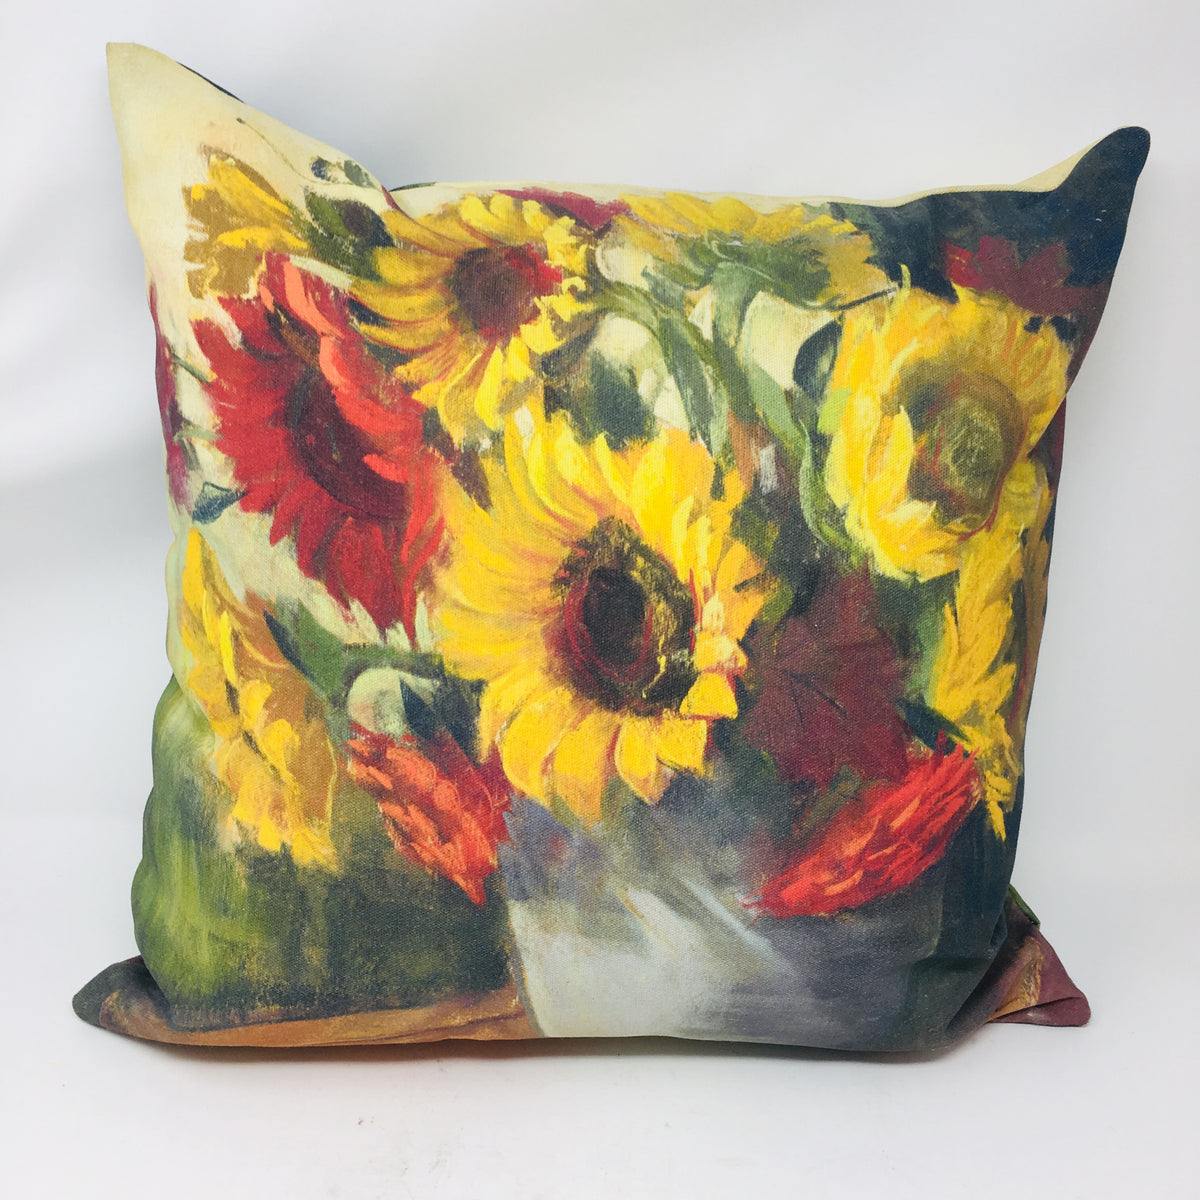 Indoor/Outdoor Colorful Pillow